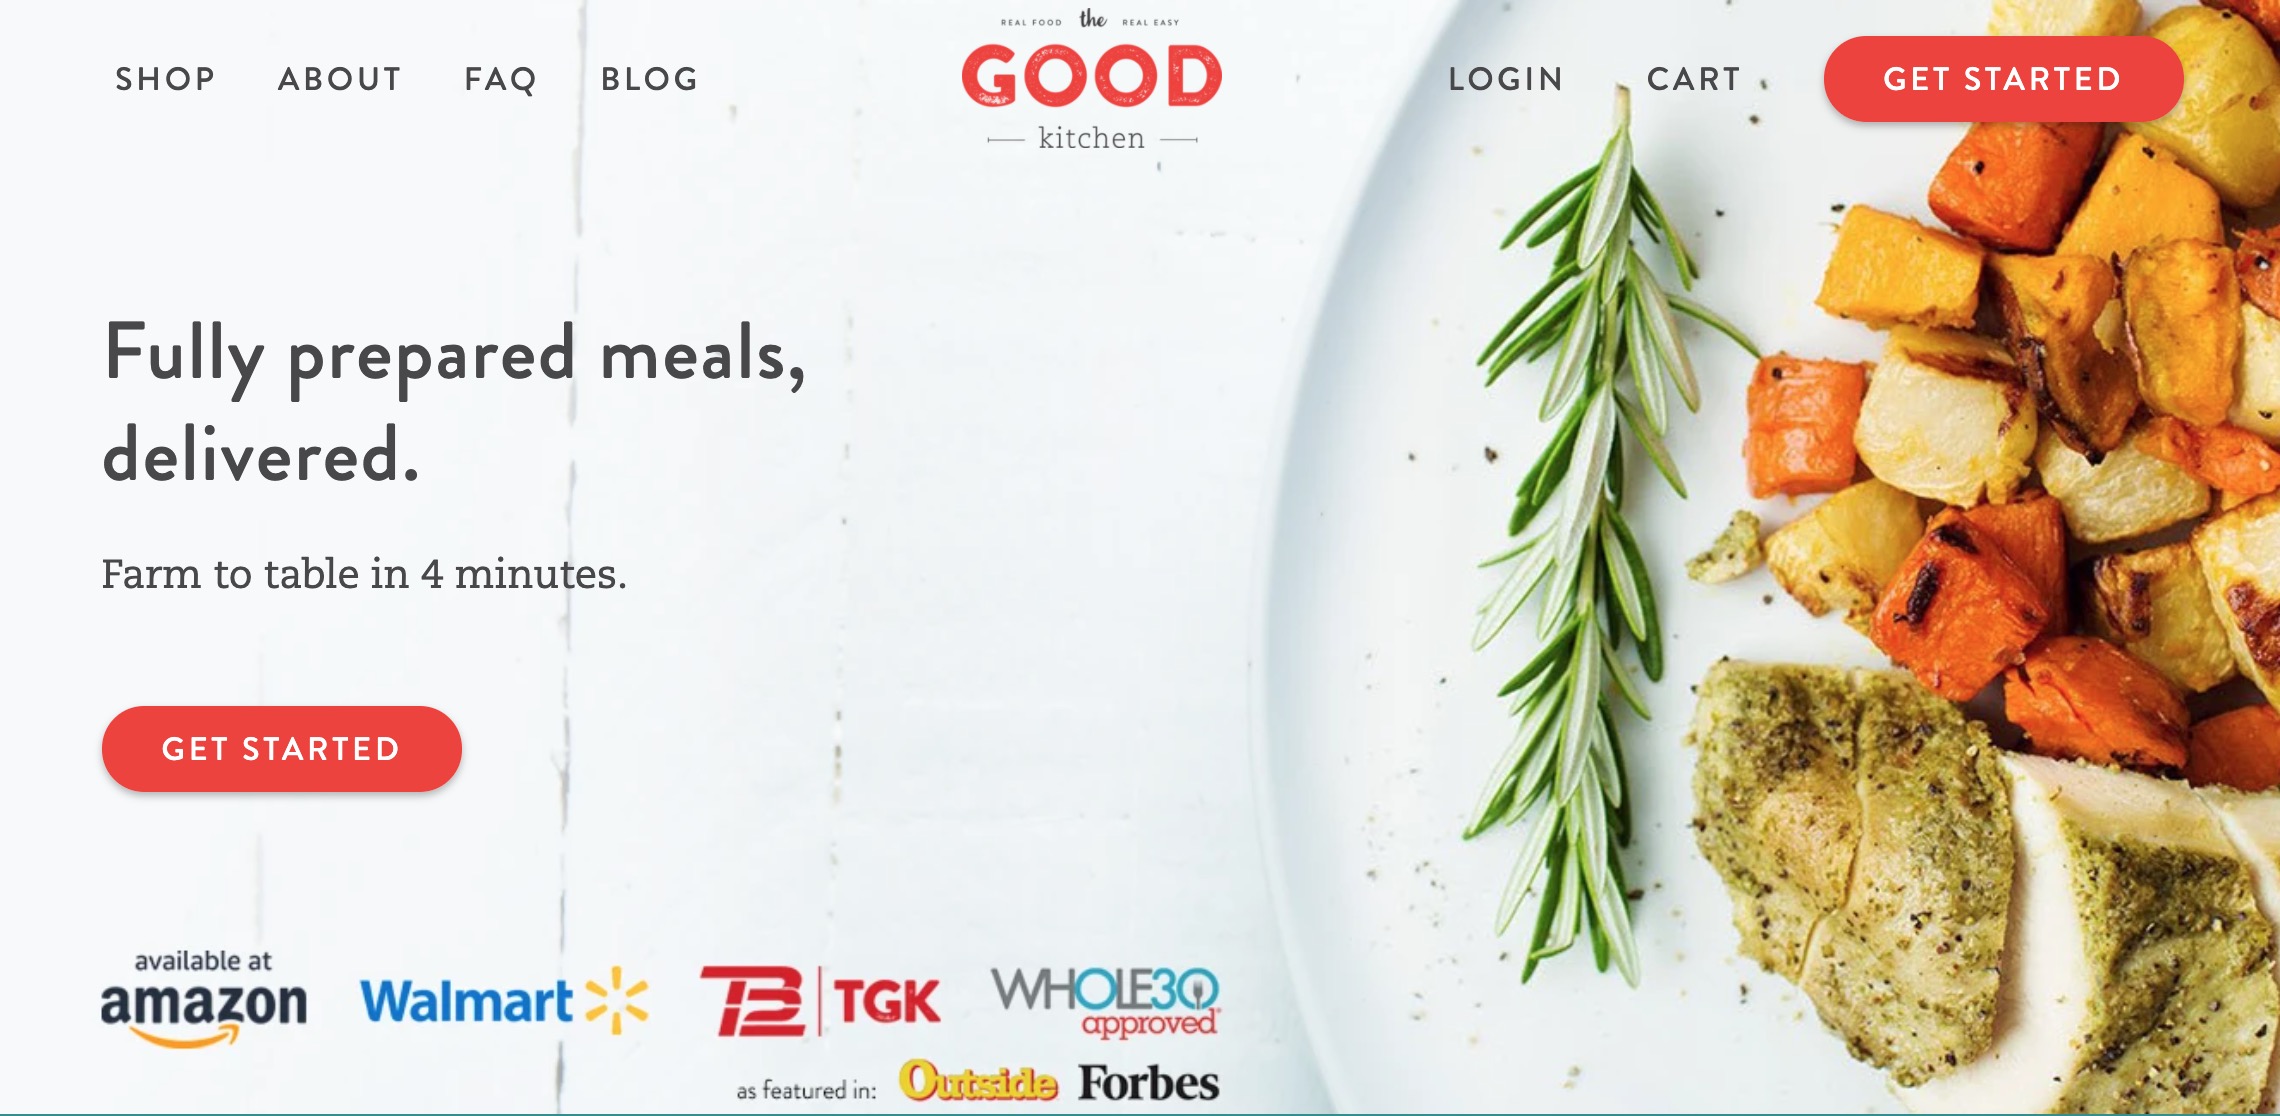 The Good Kitchen main page